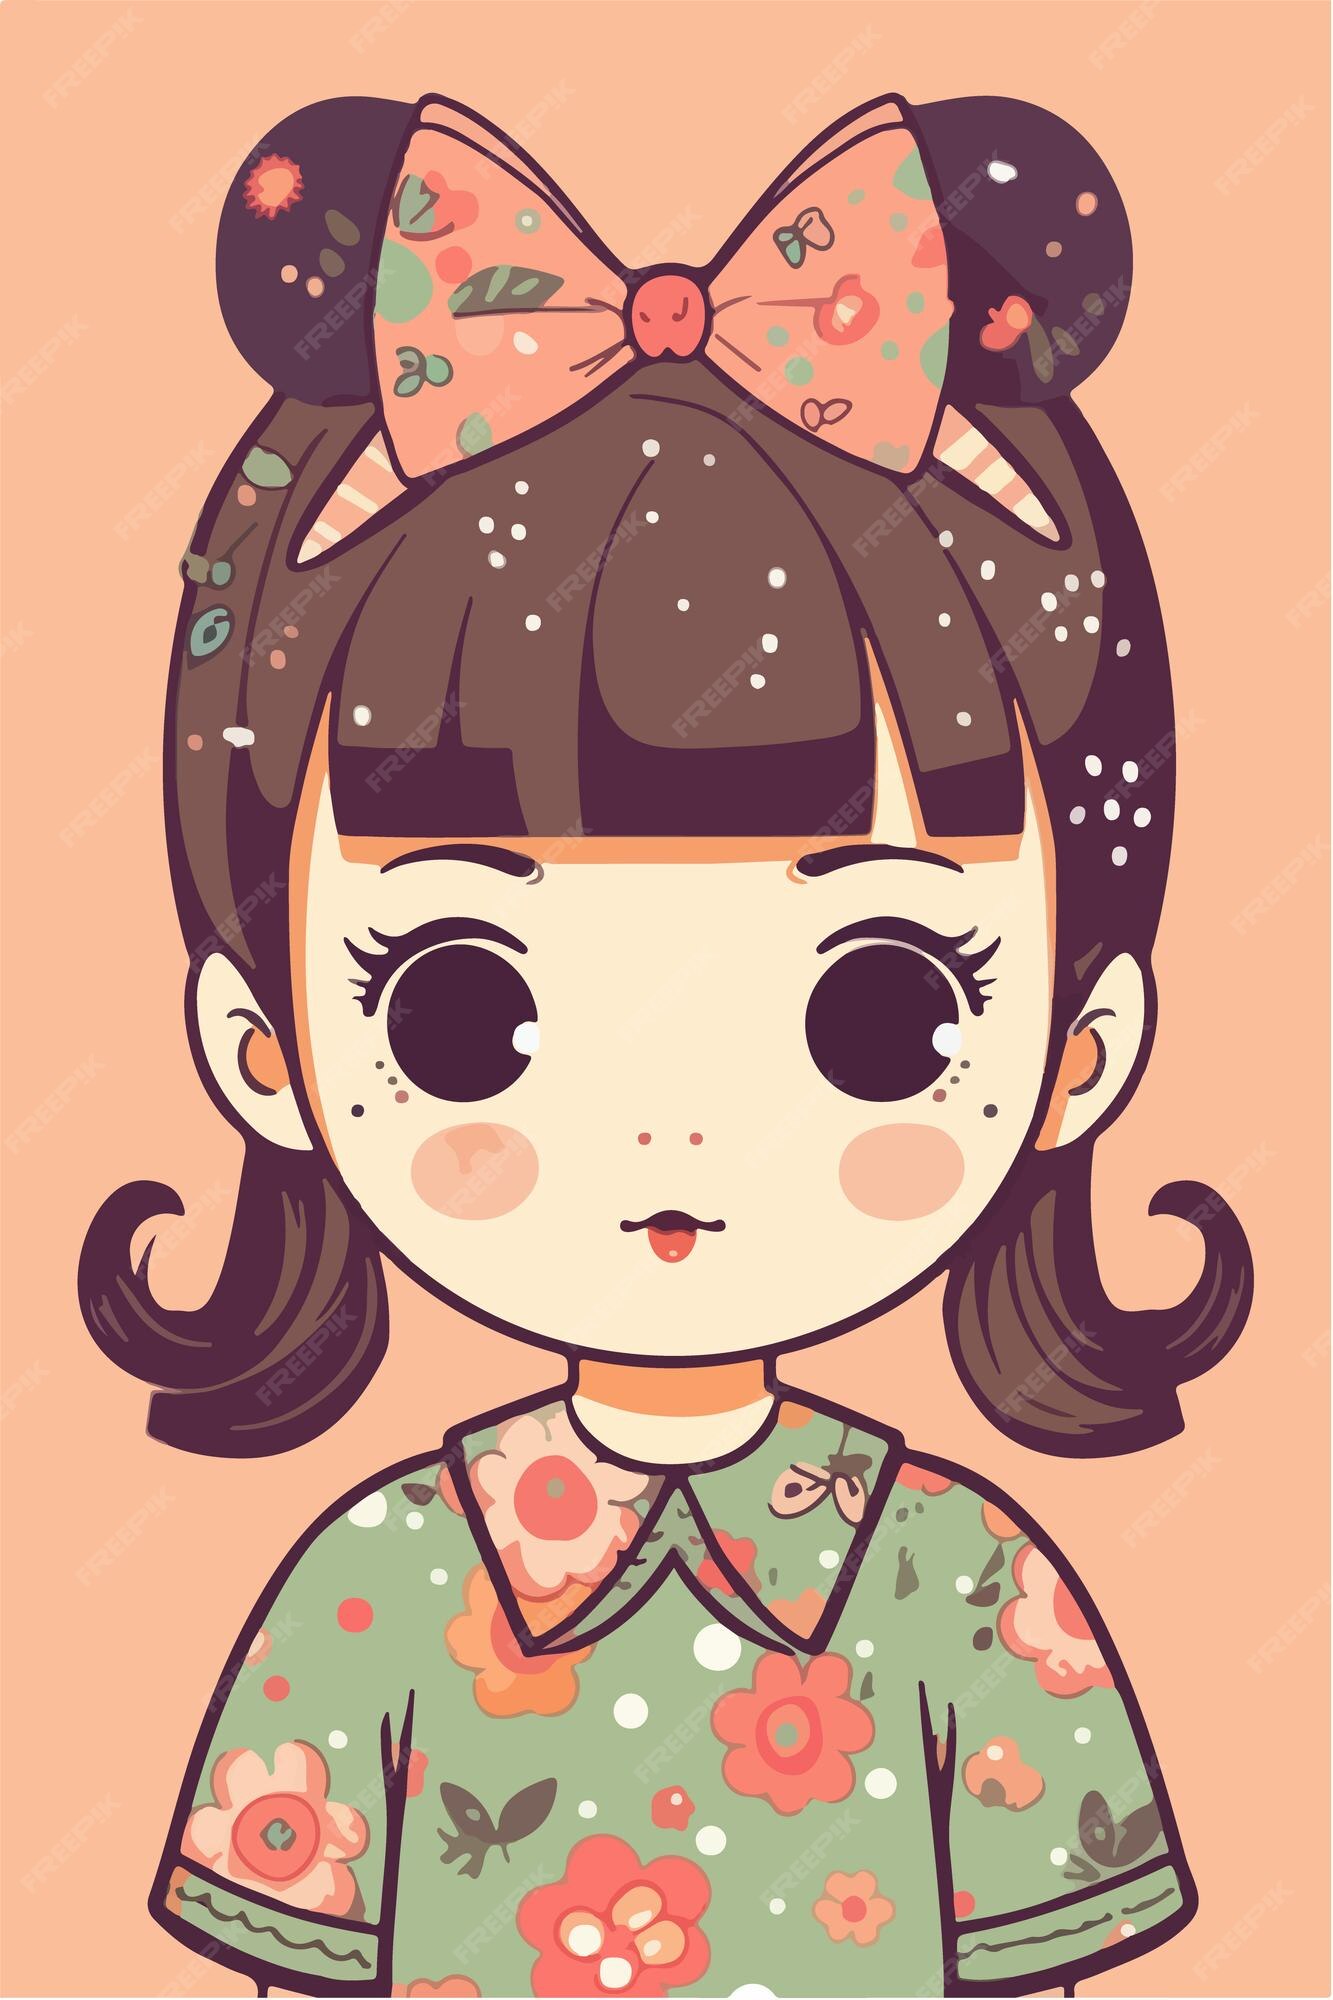 Cute Anime Girl stock vector. Illustration of drawing - 78572343